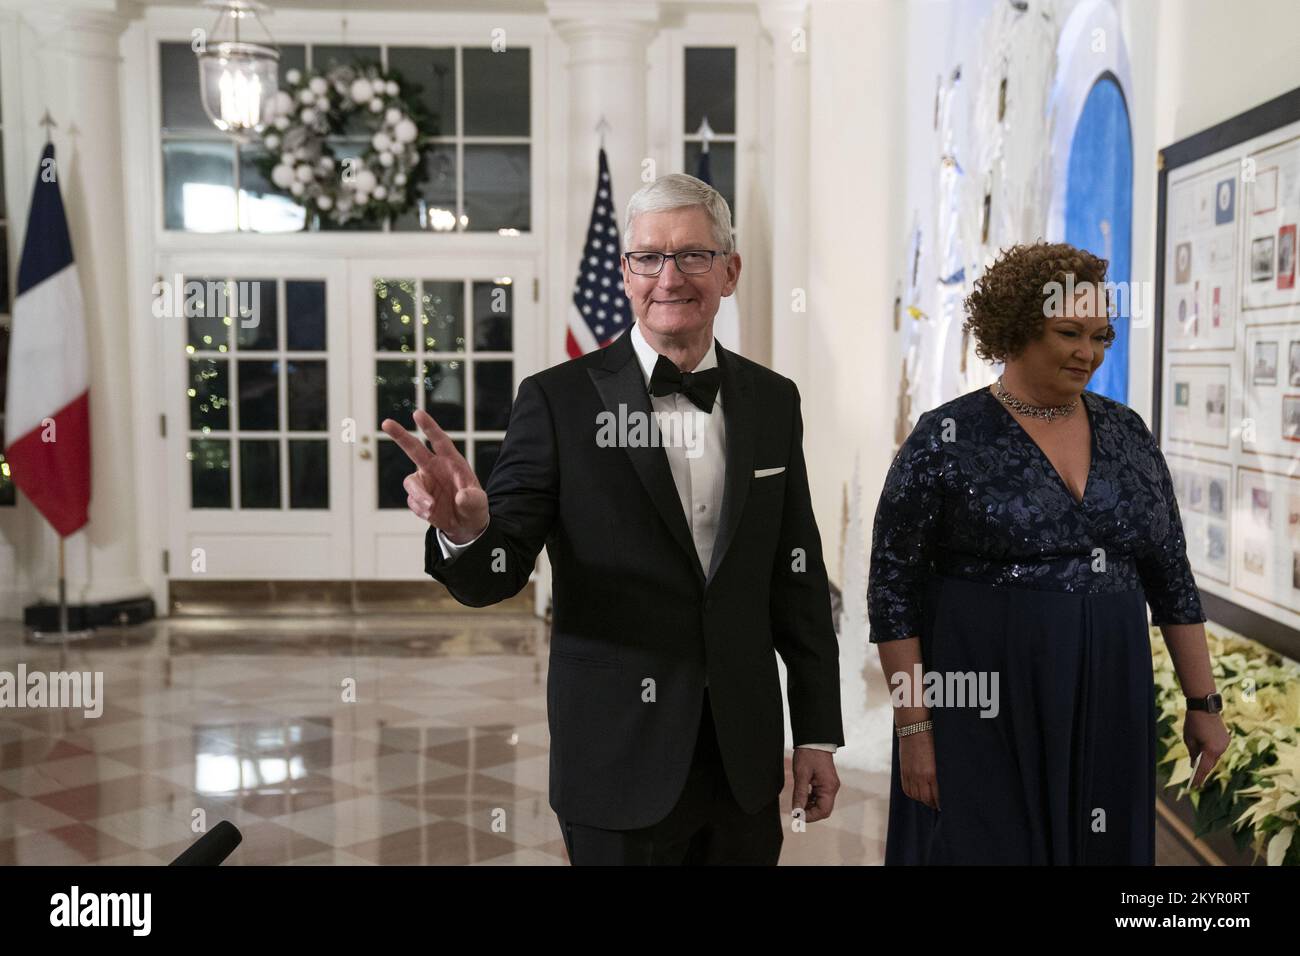 Washington, United States. 01st Dec, 2022. Timothy Cook, CEO of Apple, and Lisa Jackson, Former Administrator of the U.S. Environmental Protection Agency, arrive to attend a State Dinner in honor of President Emmanuel Macron and Brigitte Macron of France hosted by United States President Joe Biden and first lady Dr. Jill Biden at the White House in Washington, DC on Thursday, December 1, 2022. Photo by Sarah Silbiger/UPI Credit: UPI/Alamy Live News Stock Photo